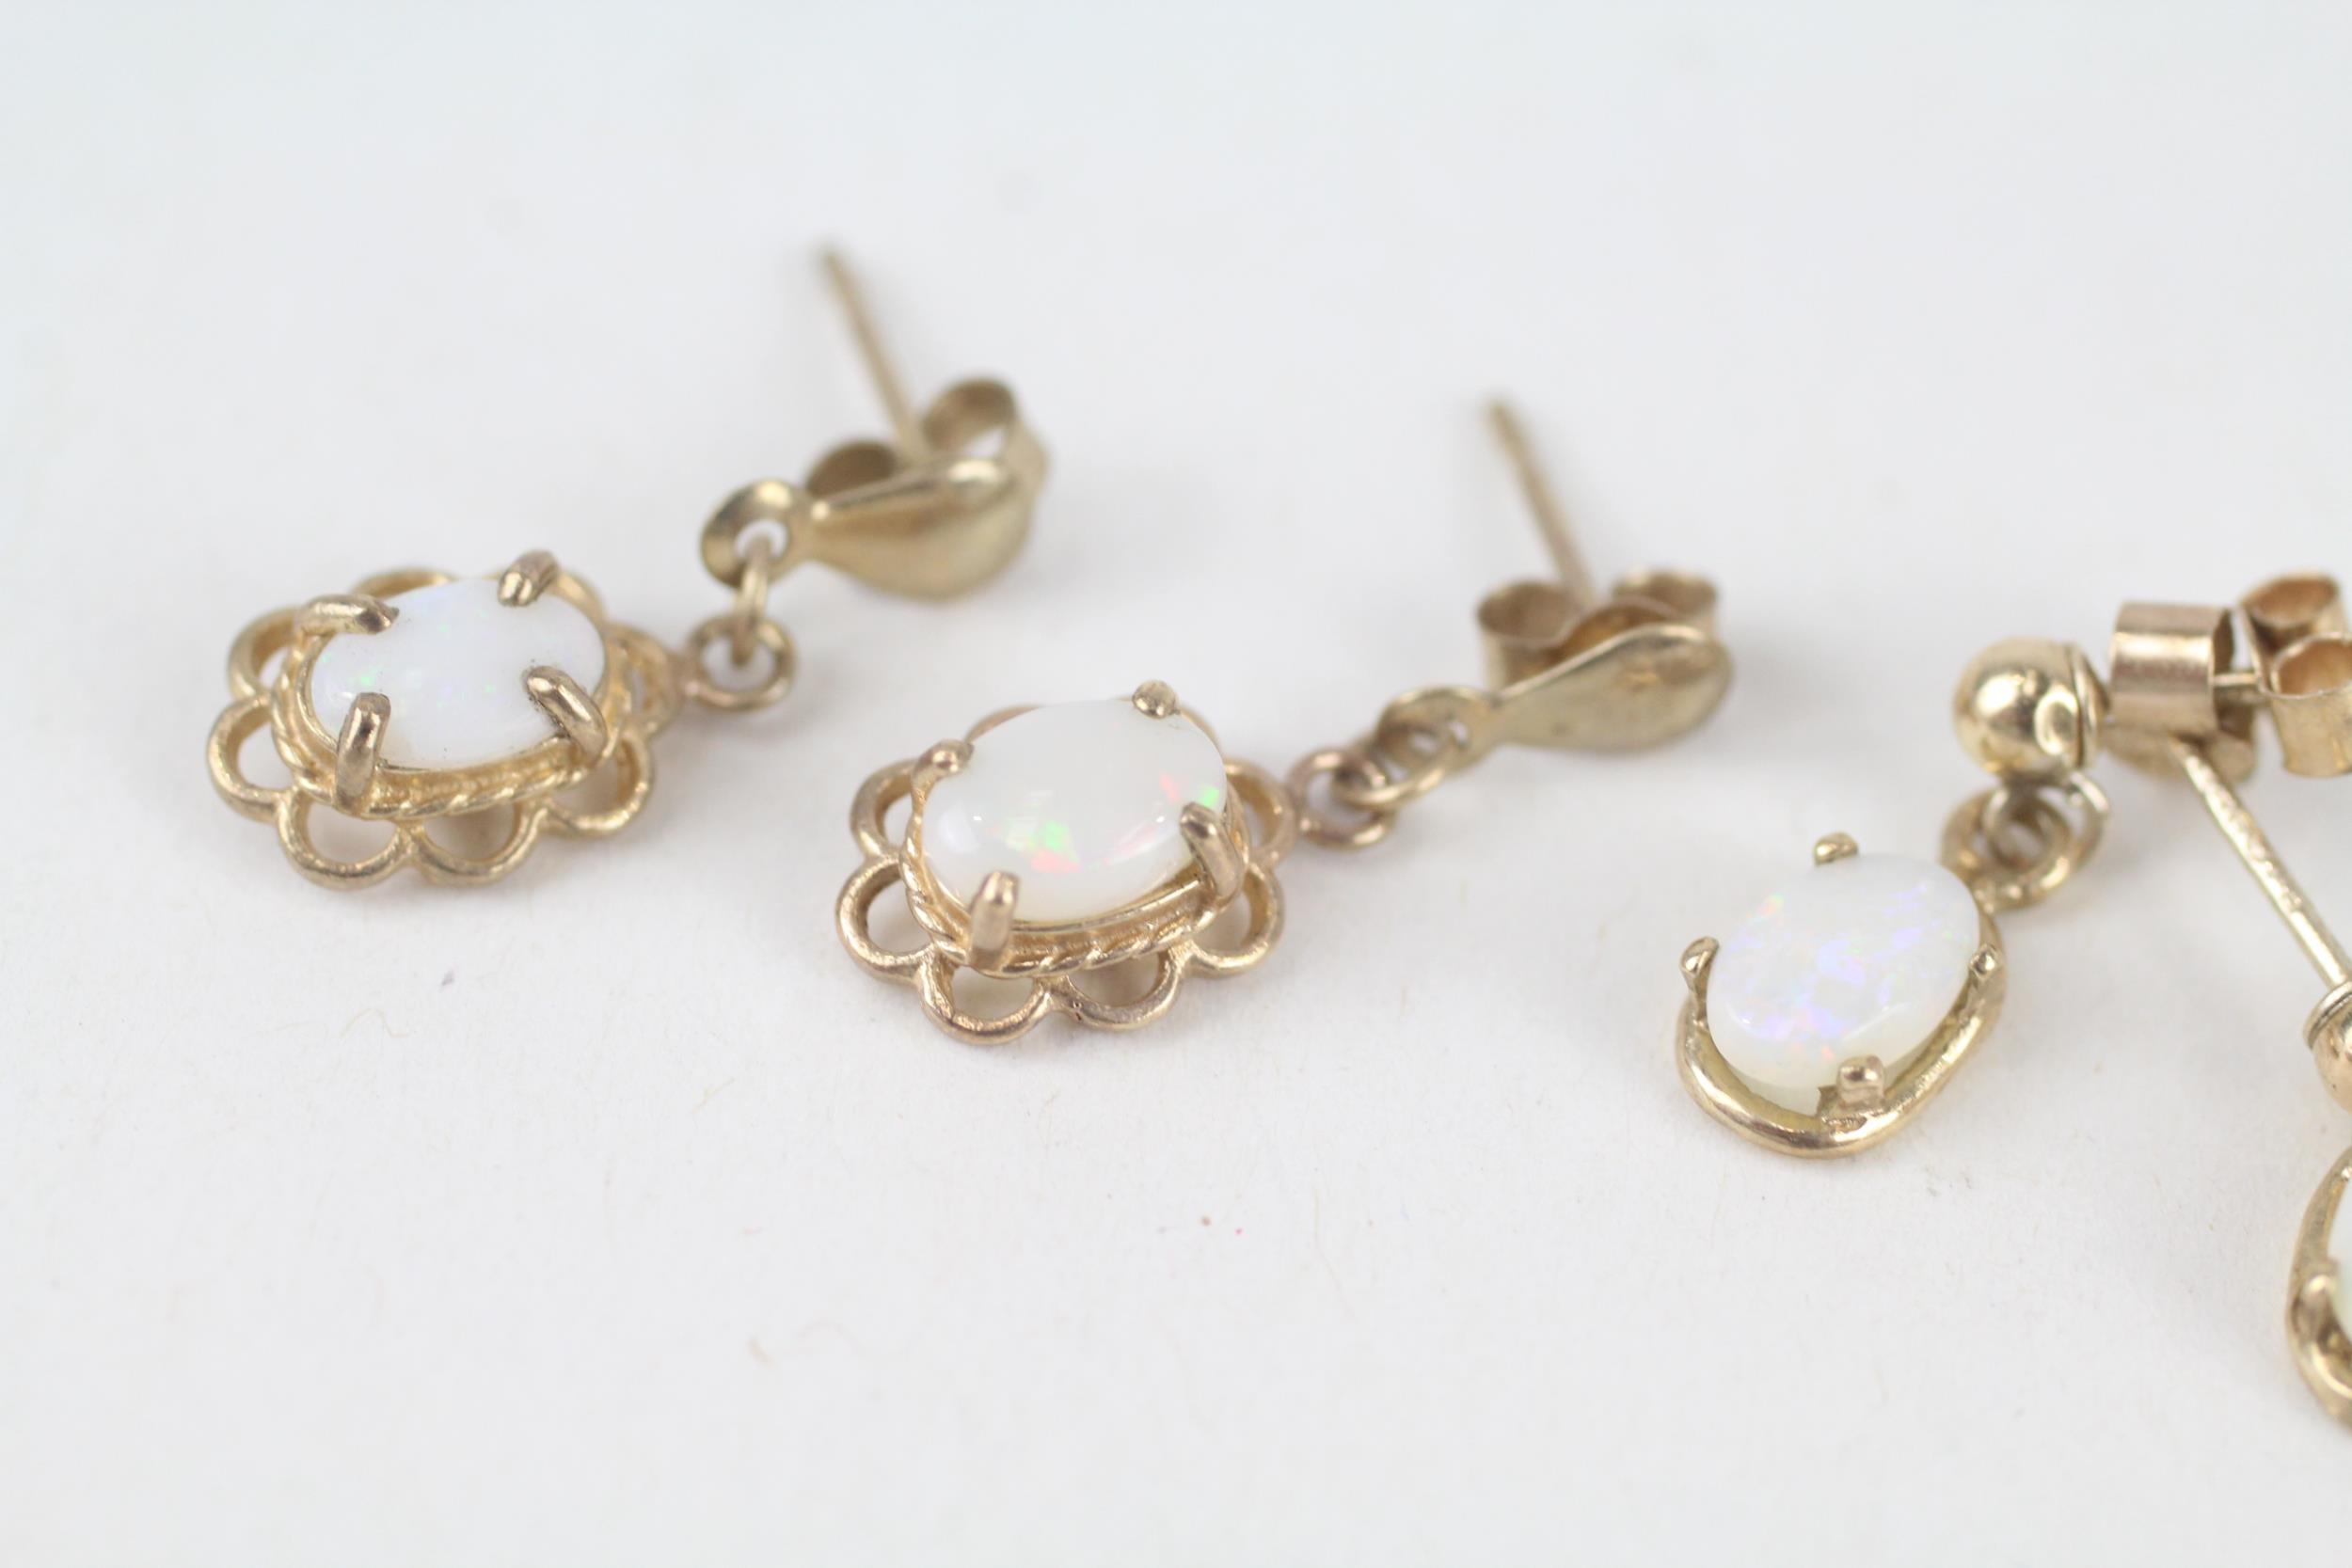 2x 9ct gold opal drop earrings with scroll backs 1.8 g - Image 3 of 5